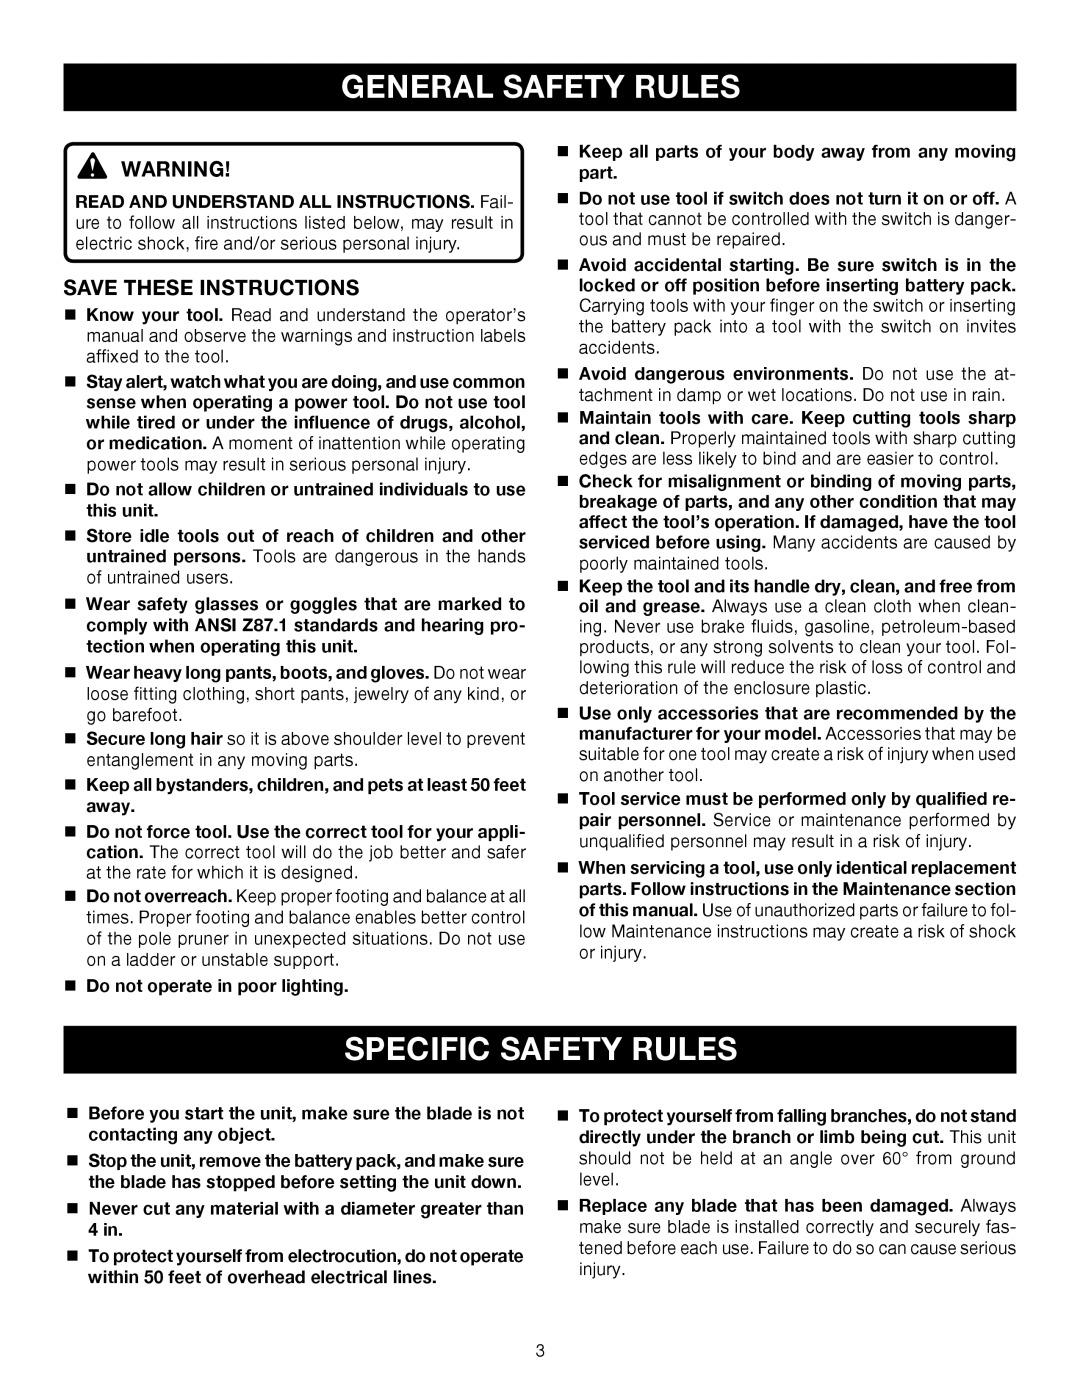 Ryobi Outdoor P2500 manual General Safety Rules, Specific Safety Rules, Save These Instructions 